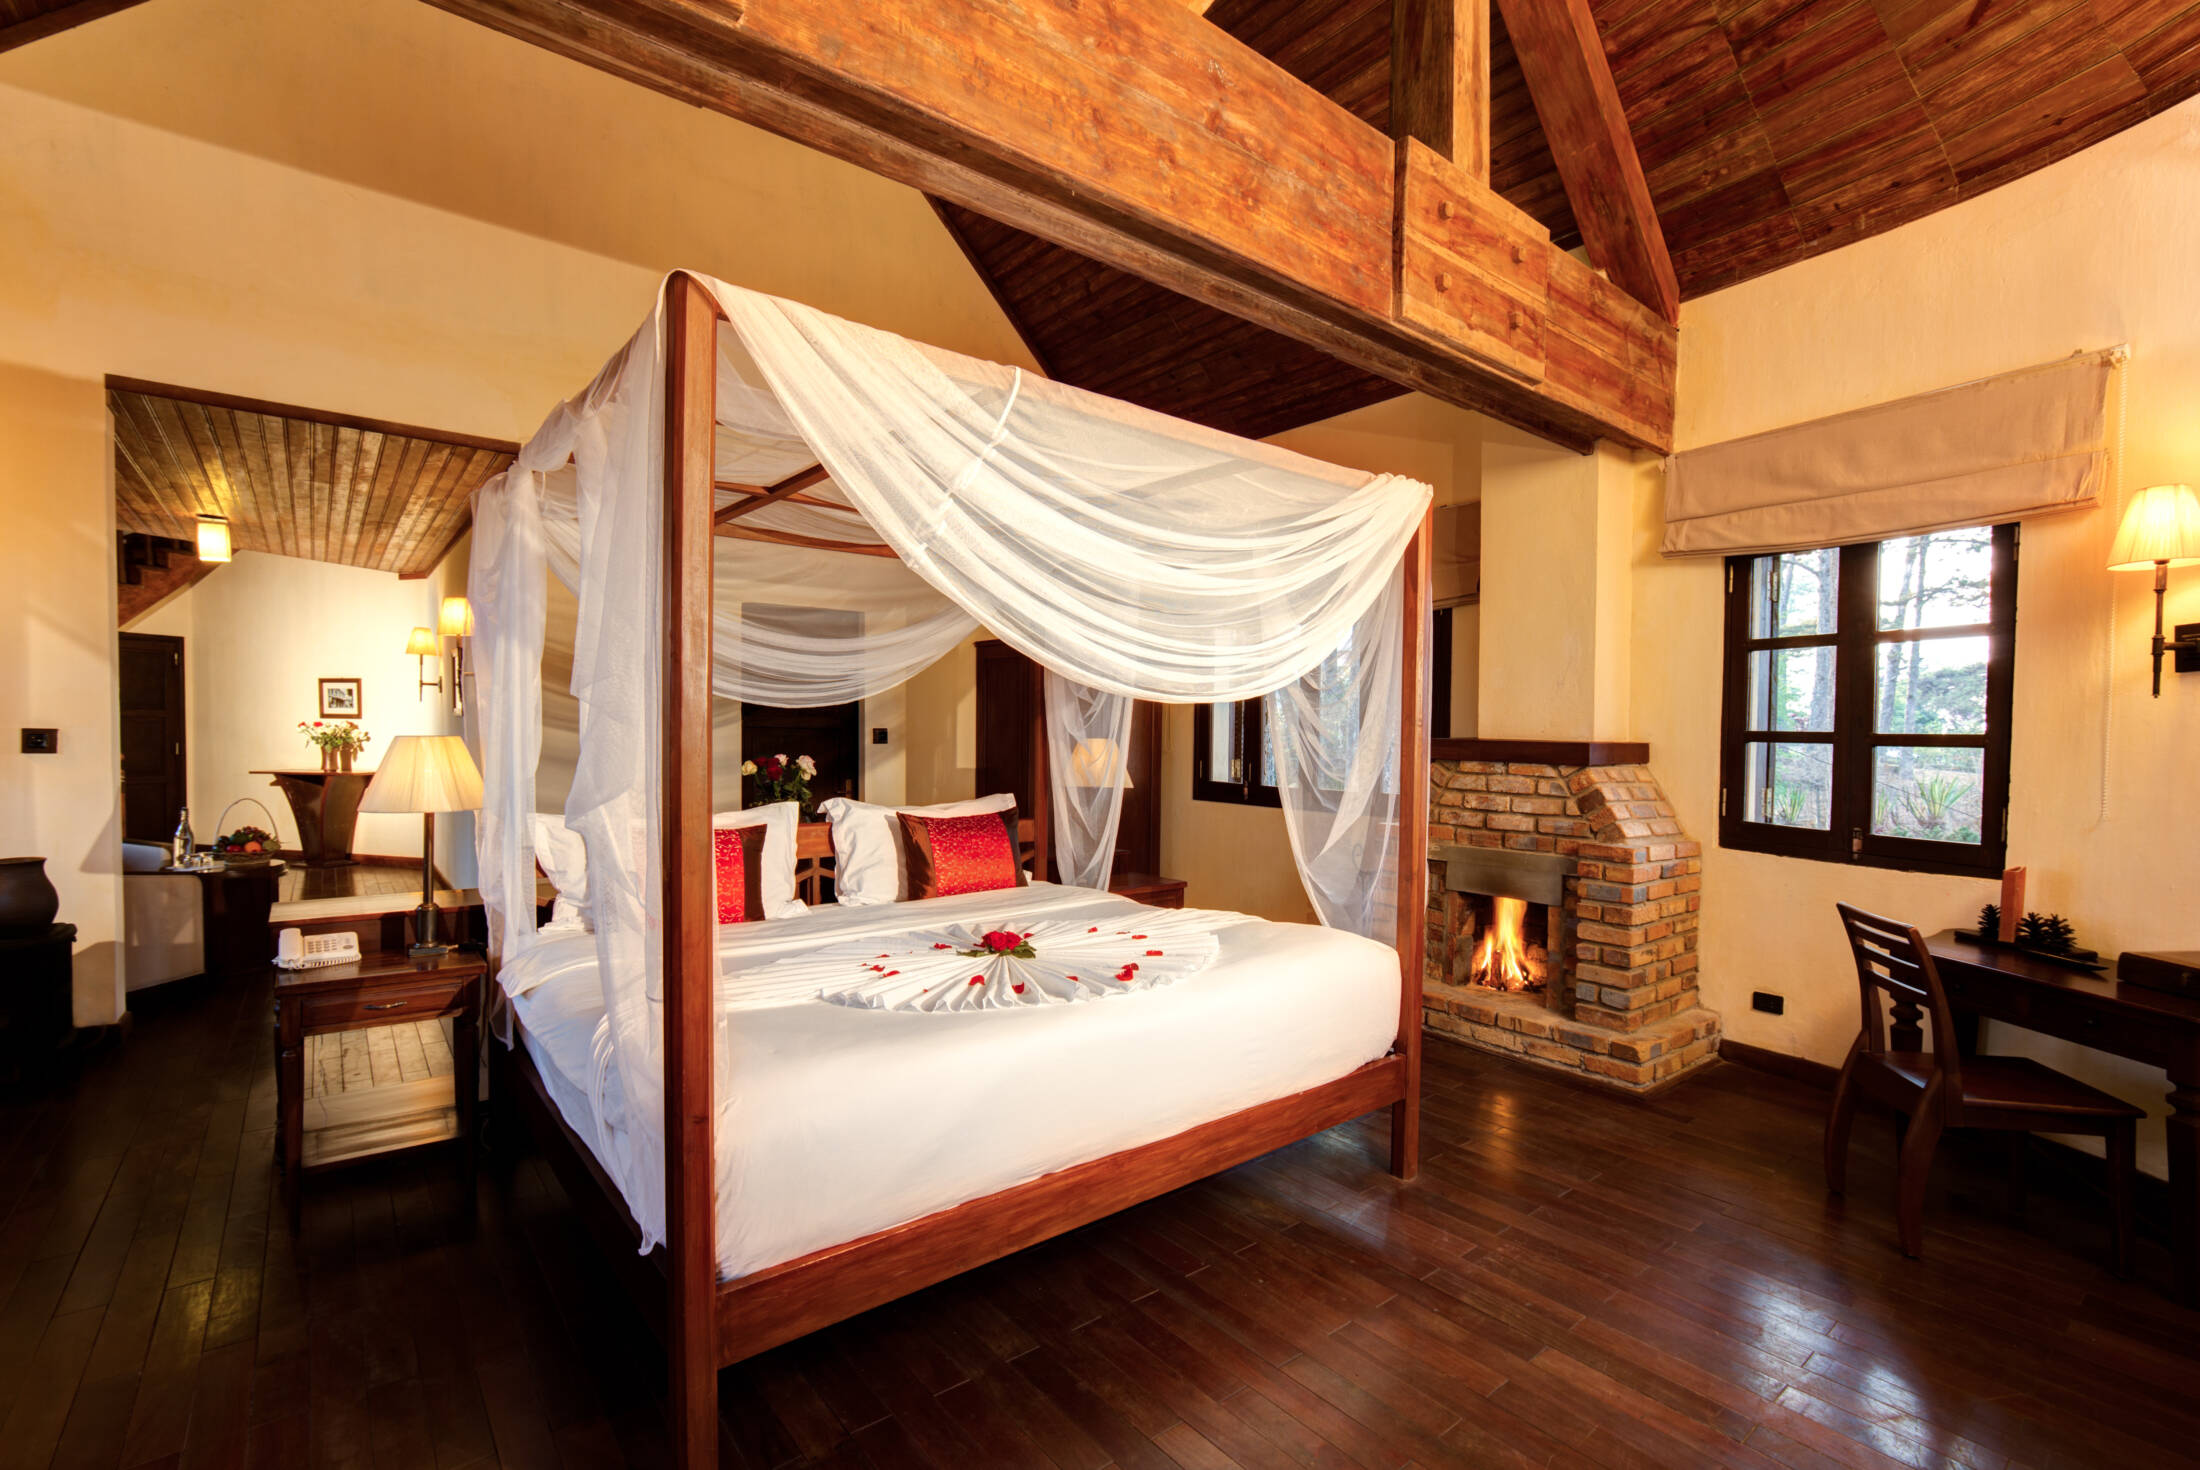 How to create the perfect decoration honeymoon room for your romantic getaway